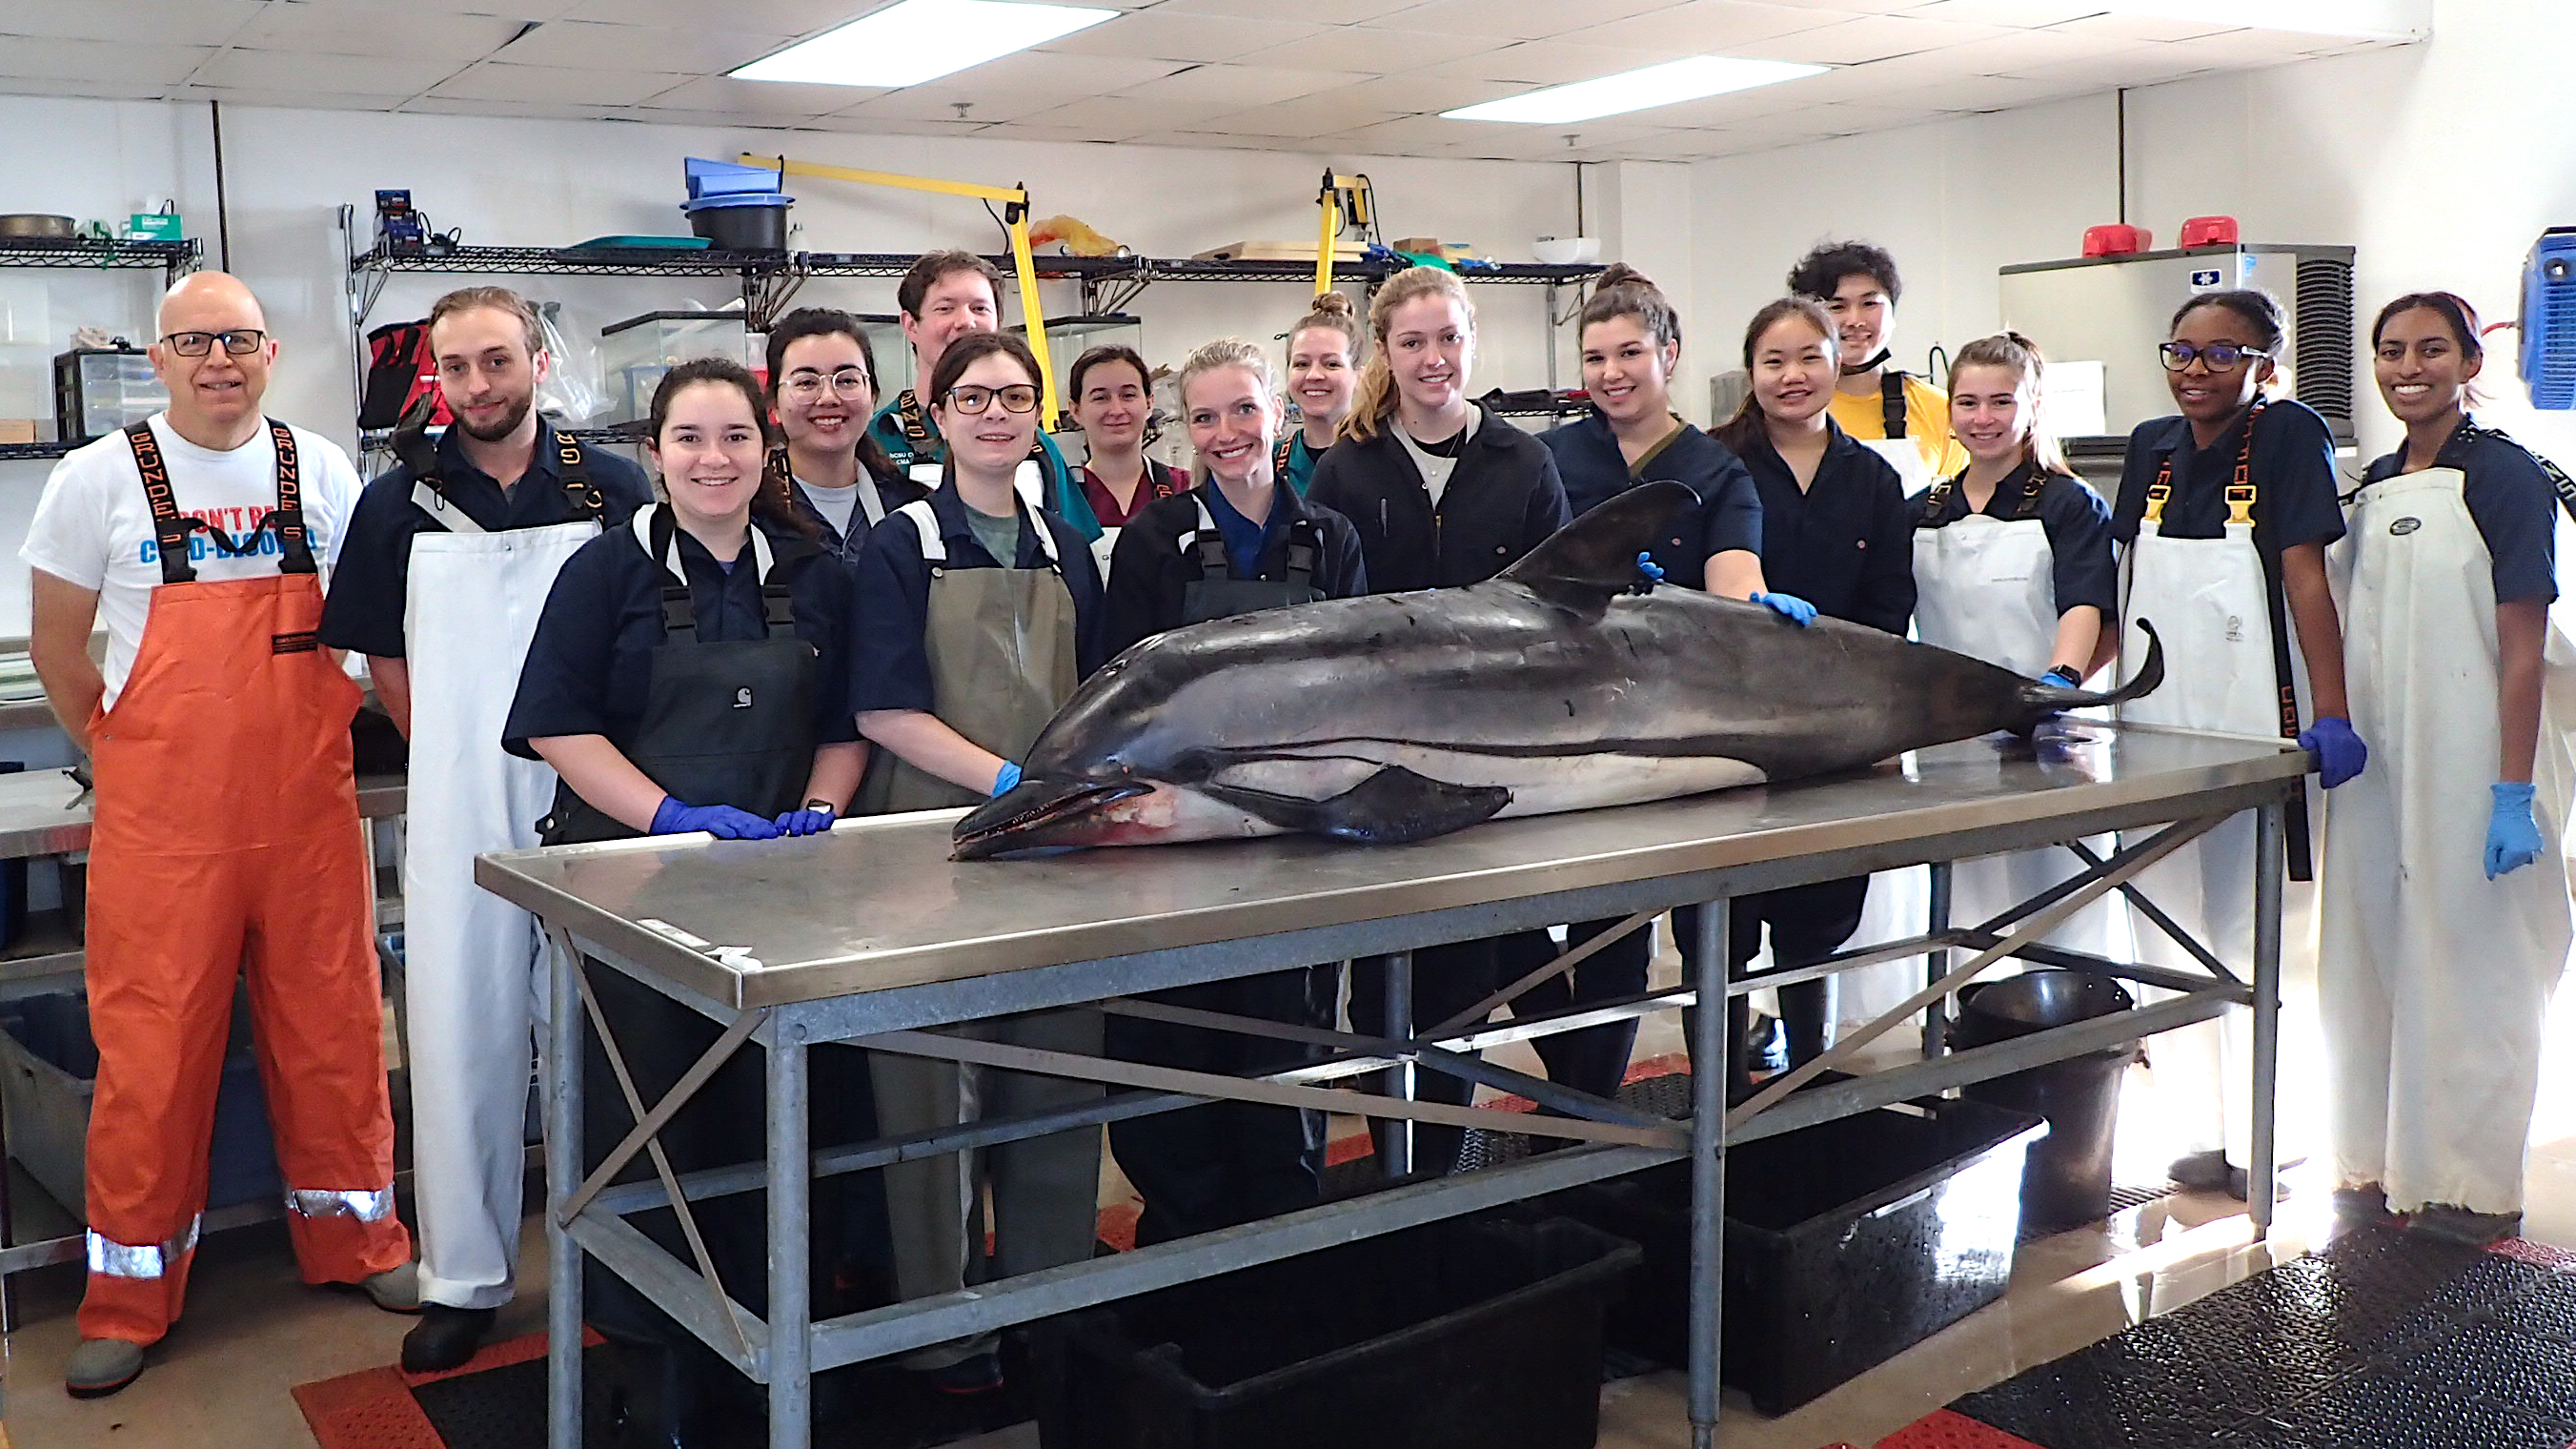 Group photo prior to postmortem examination of striped dolphin (photo by Vicky Thayer).